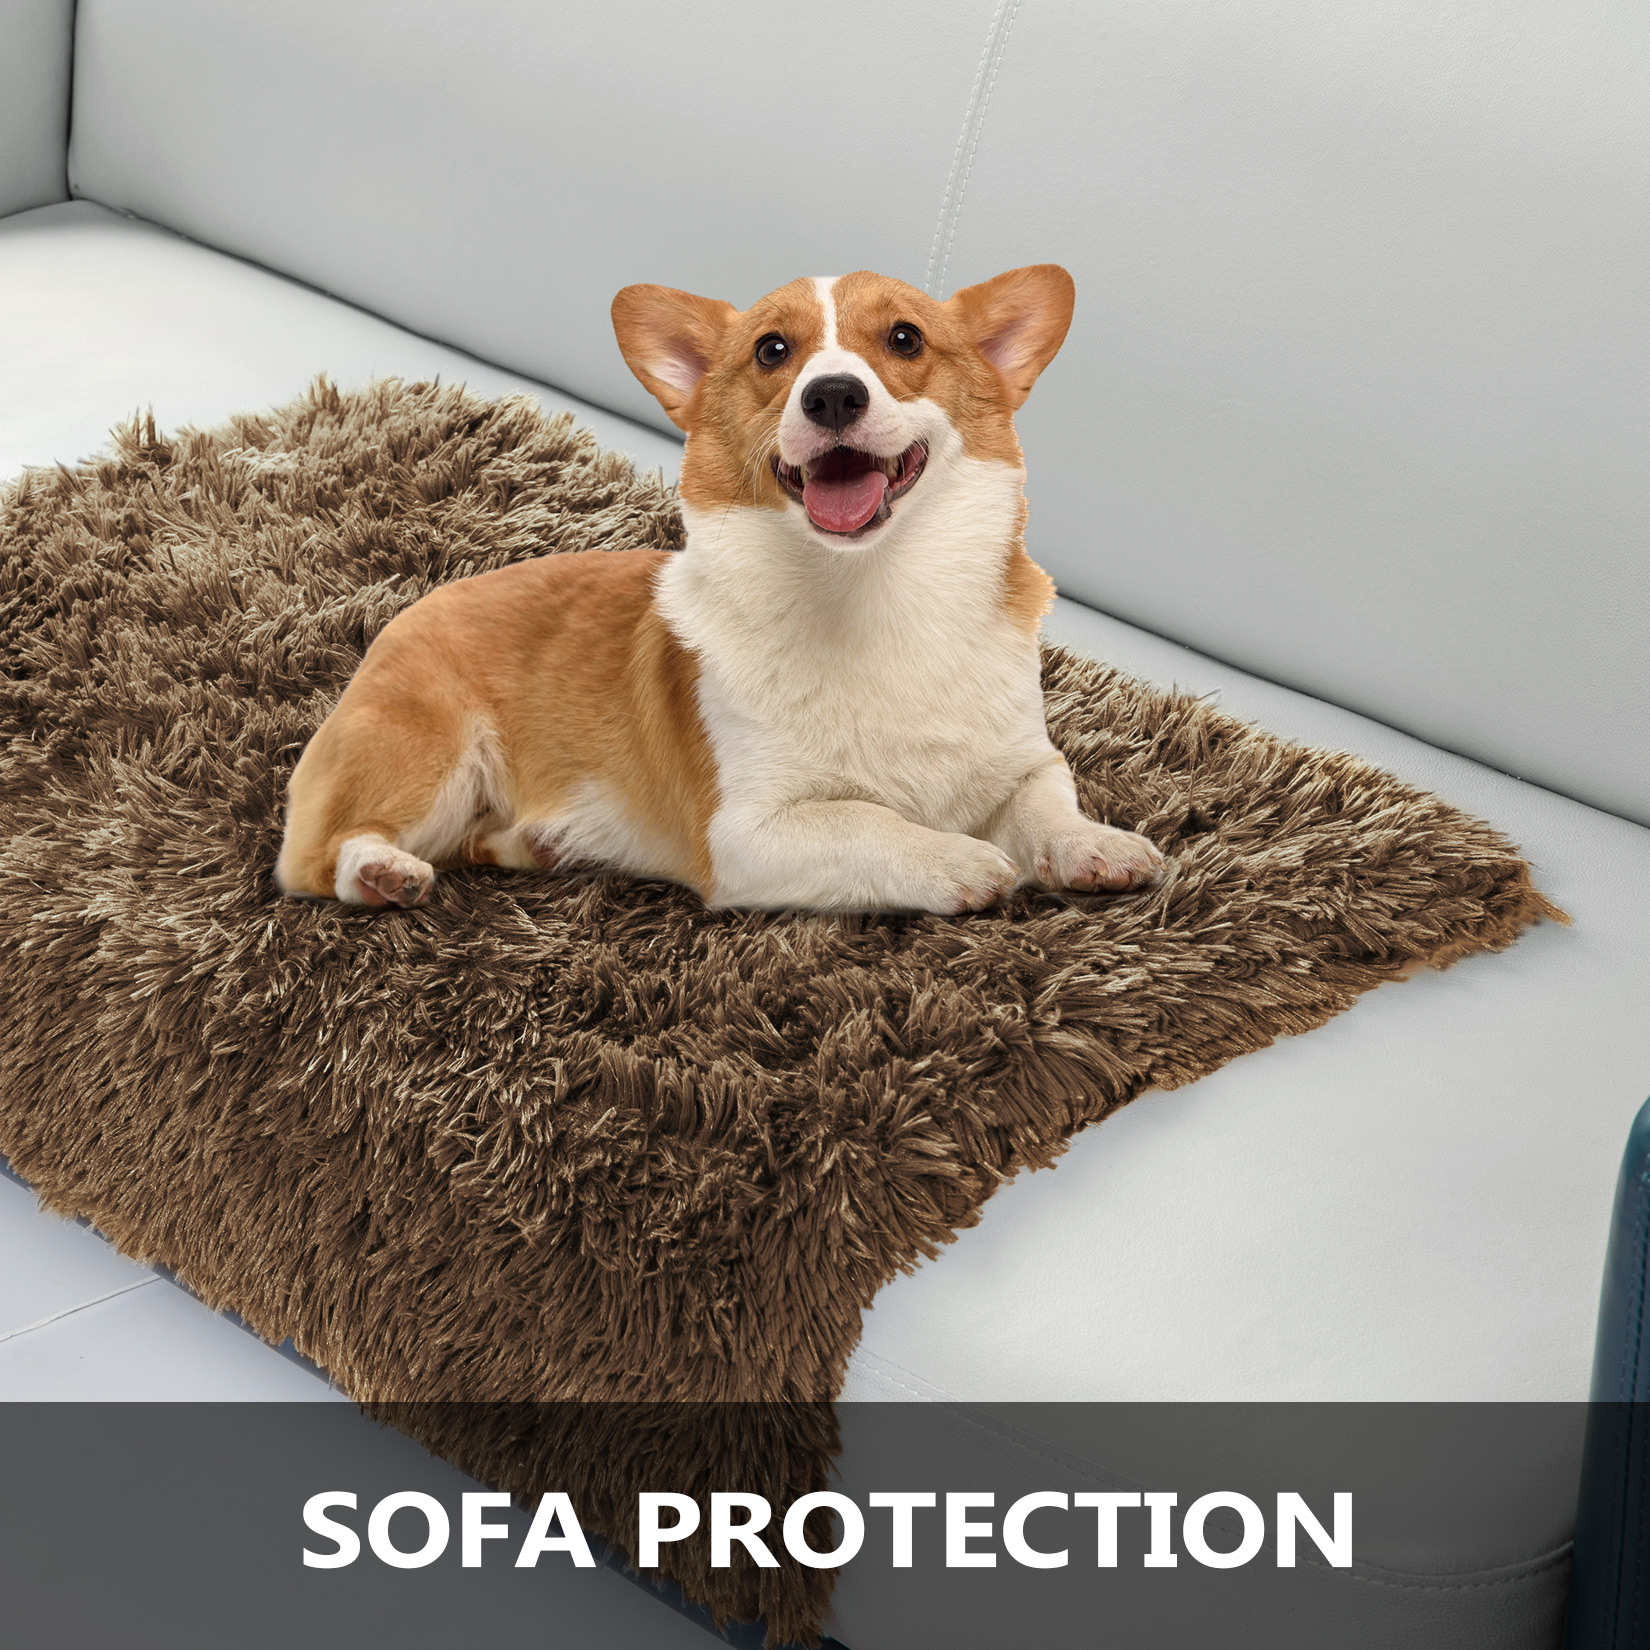 HA-EMORE Waterproof Dog Blanket for Bed Couch Sofa Soft Warm Fluffy Faux Fur Fleece Puppy Blankets Machine Washable Pet Blanket Brown 60×80cm - image 1 of 4